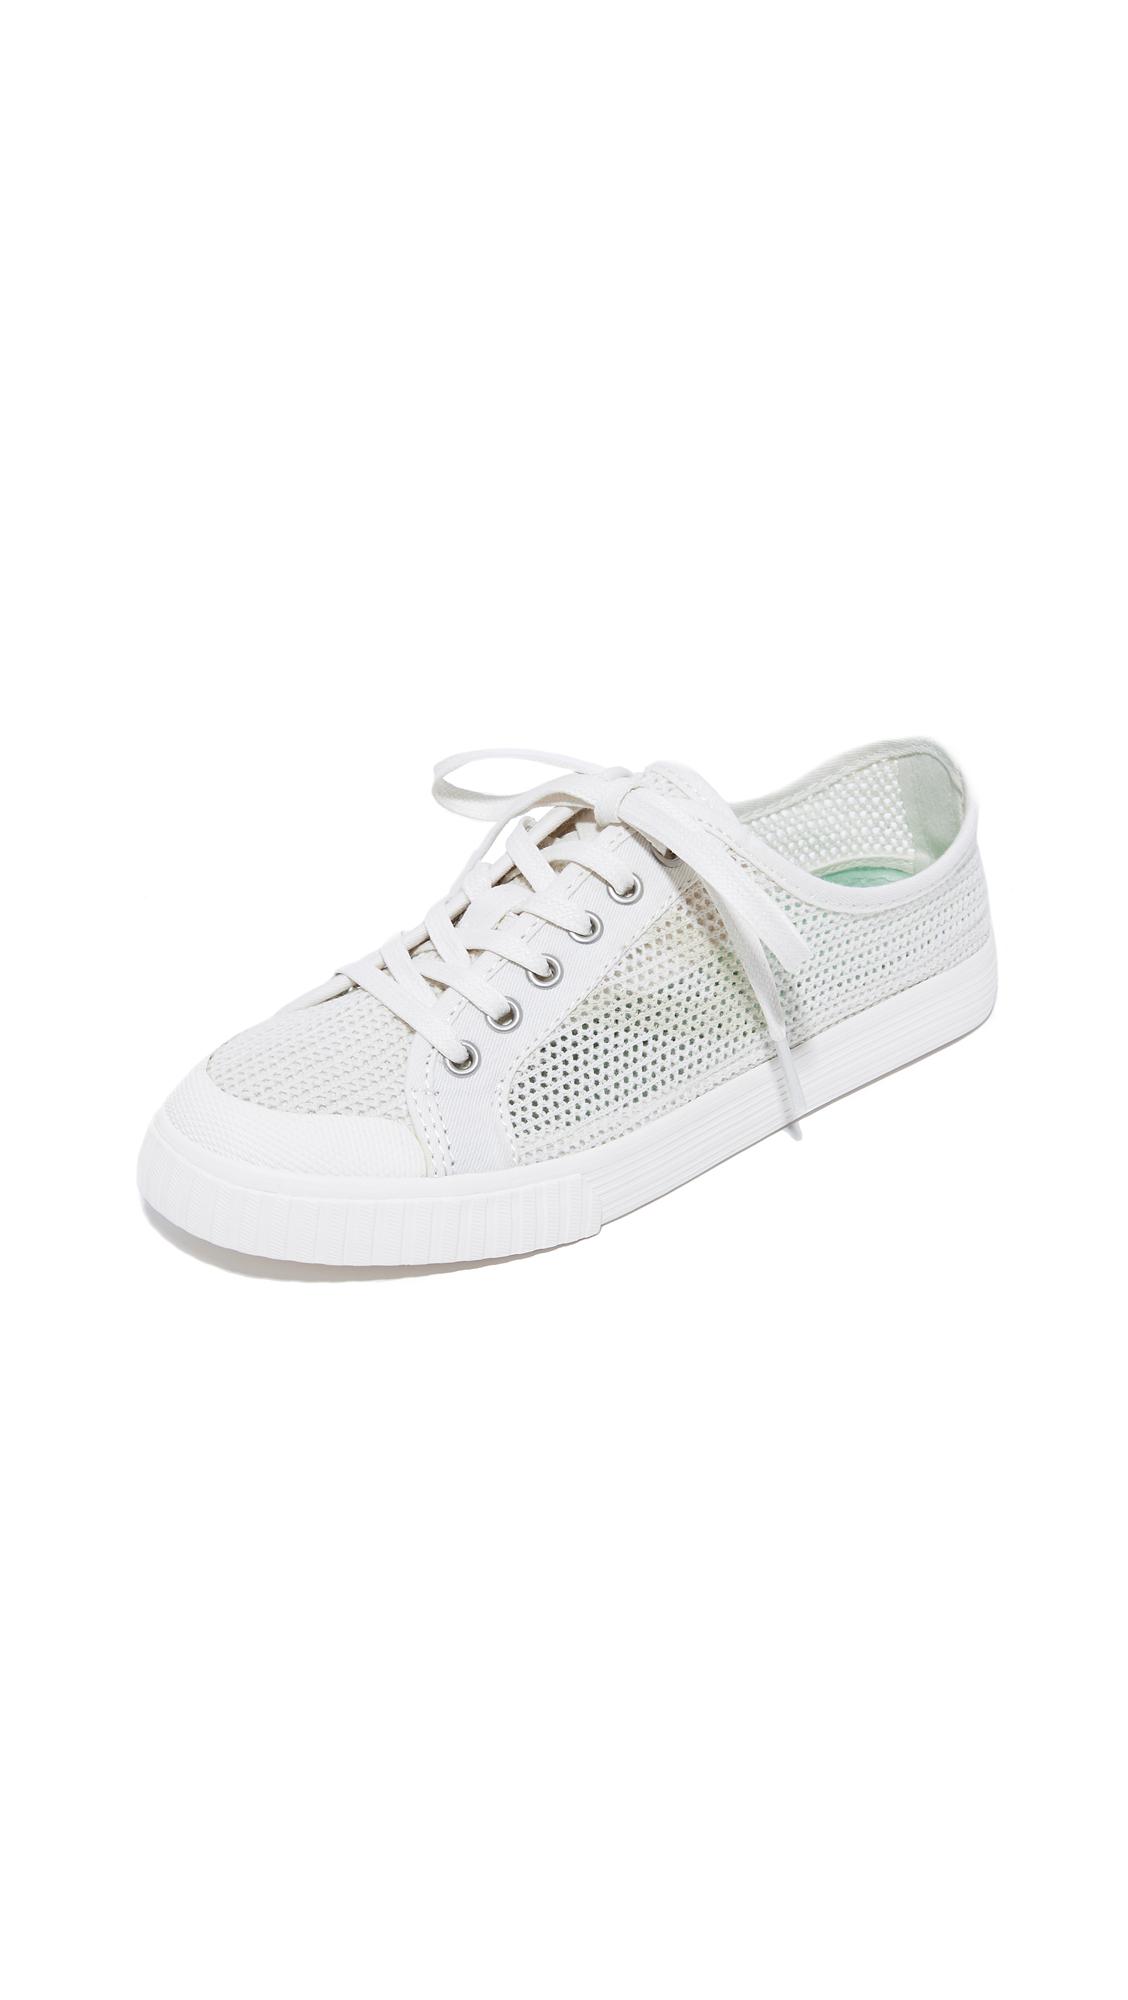 Tretorn Tournament Net Sneakers in Vintage White (White) - Save 31% - Lyst